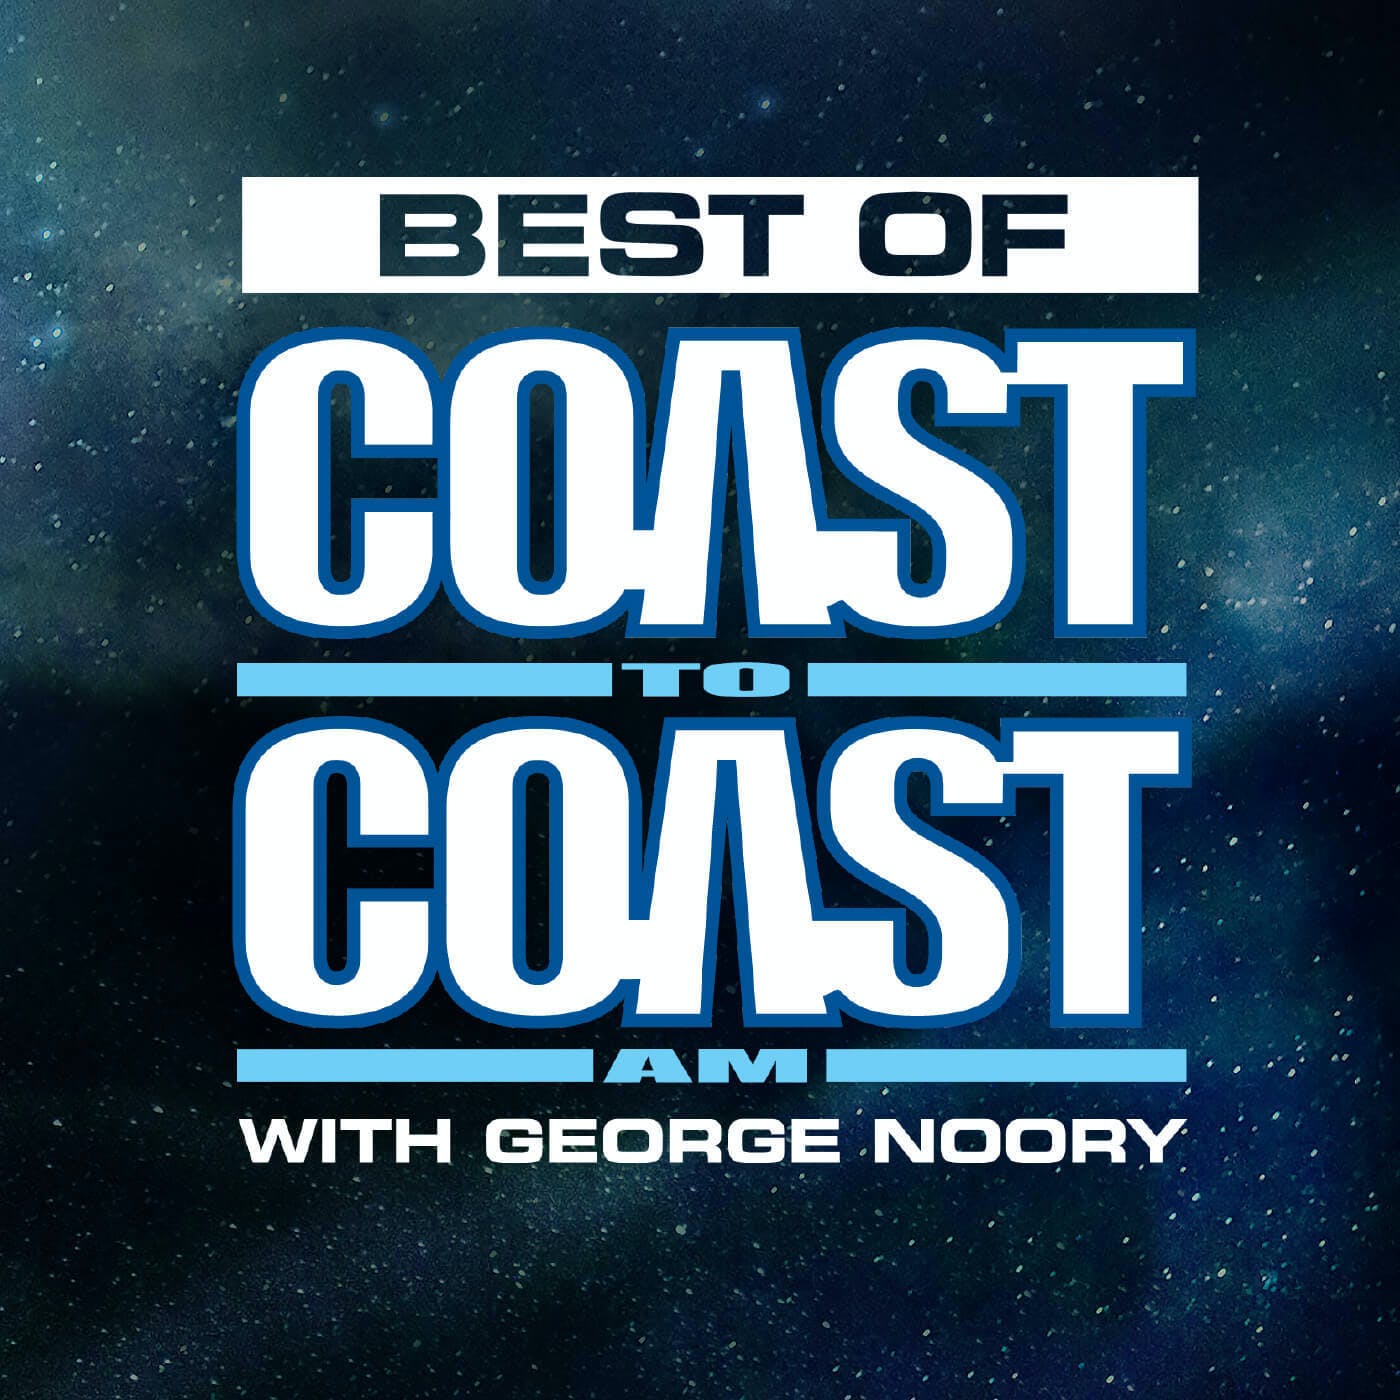 What Happens After We Die? - Best of Coast to Coast AM - 11/4/21